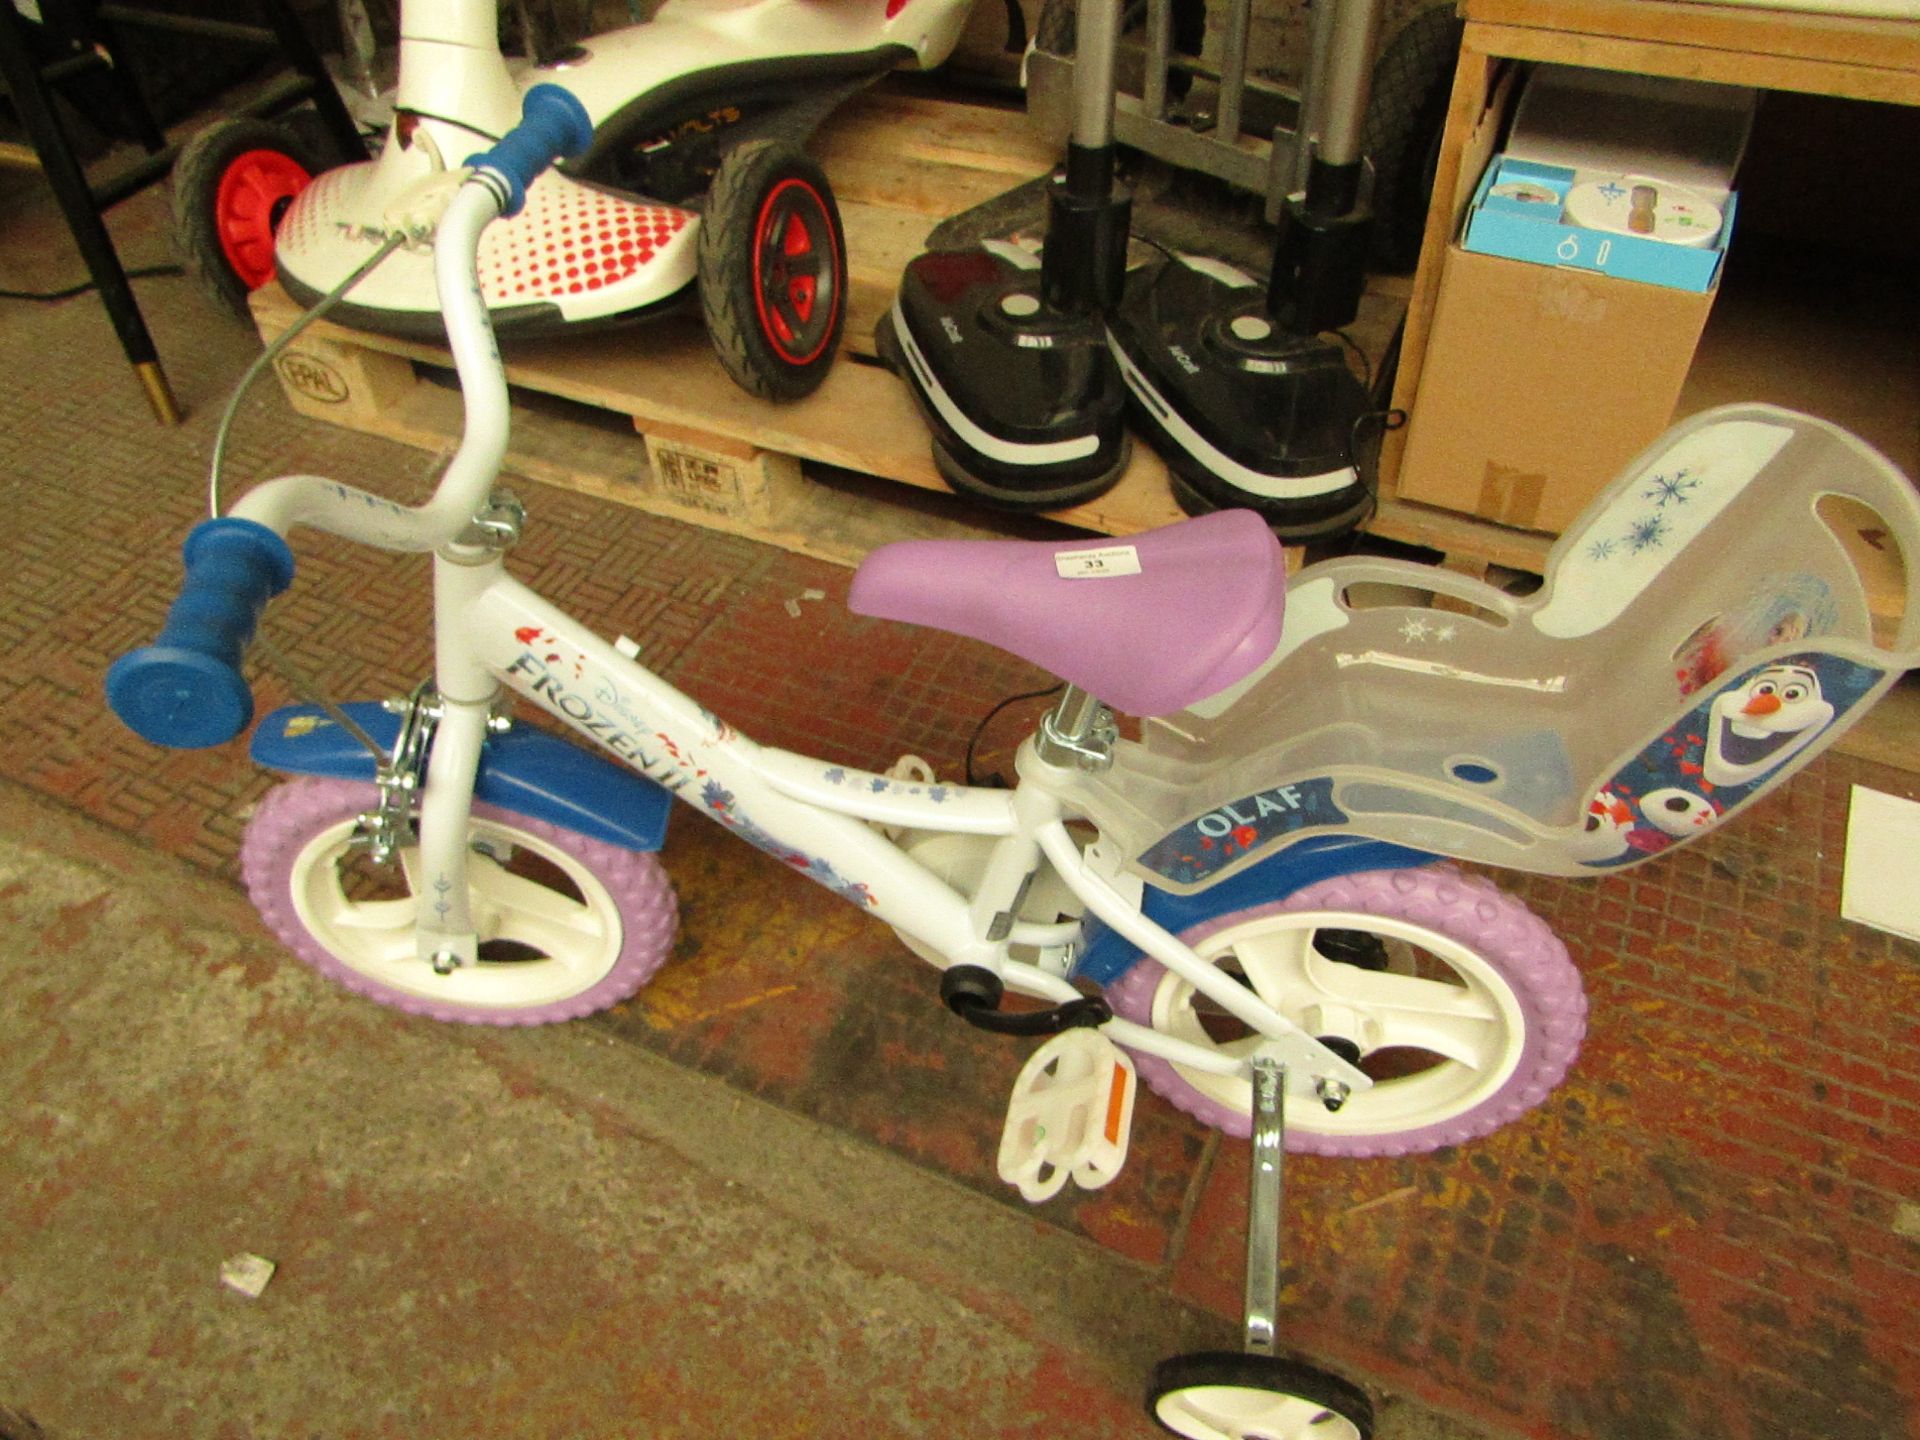 Disney Frozen 2 Bicycle with Doll Holder & Stabilizers. Handlebars need Tightening up but looks